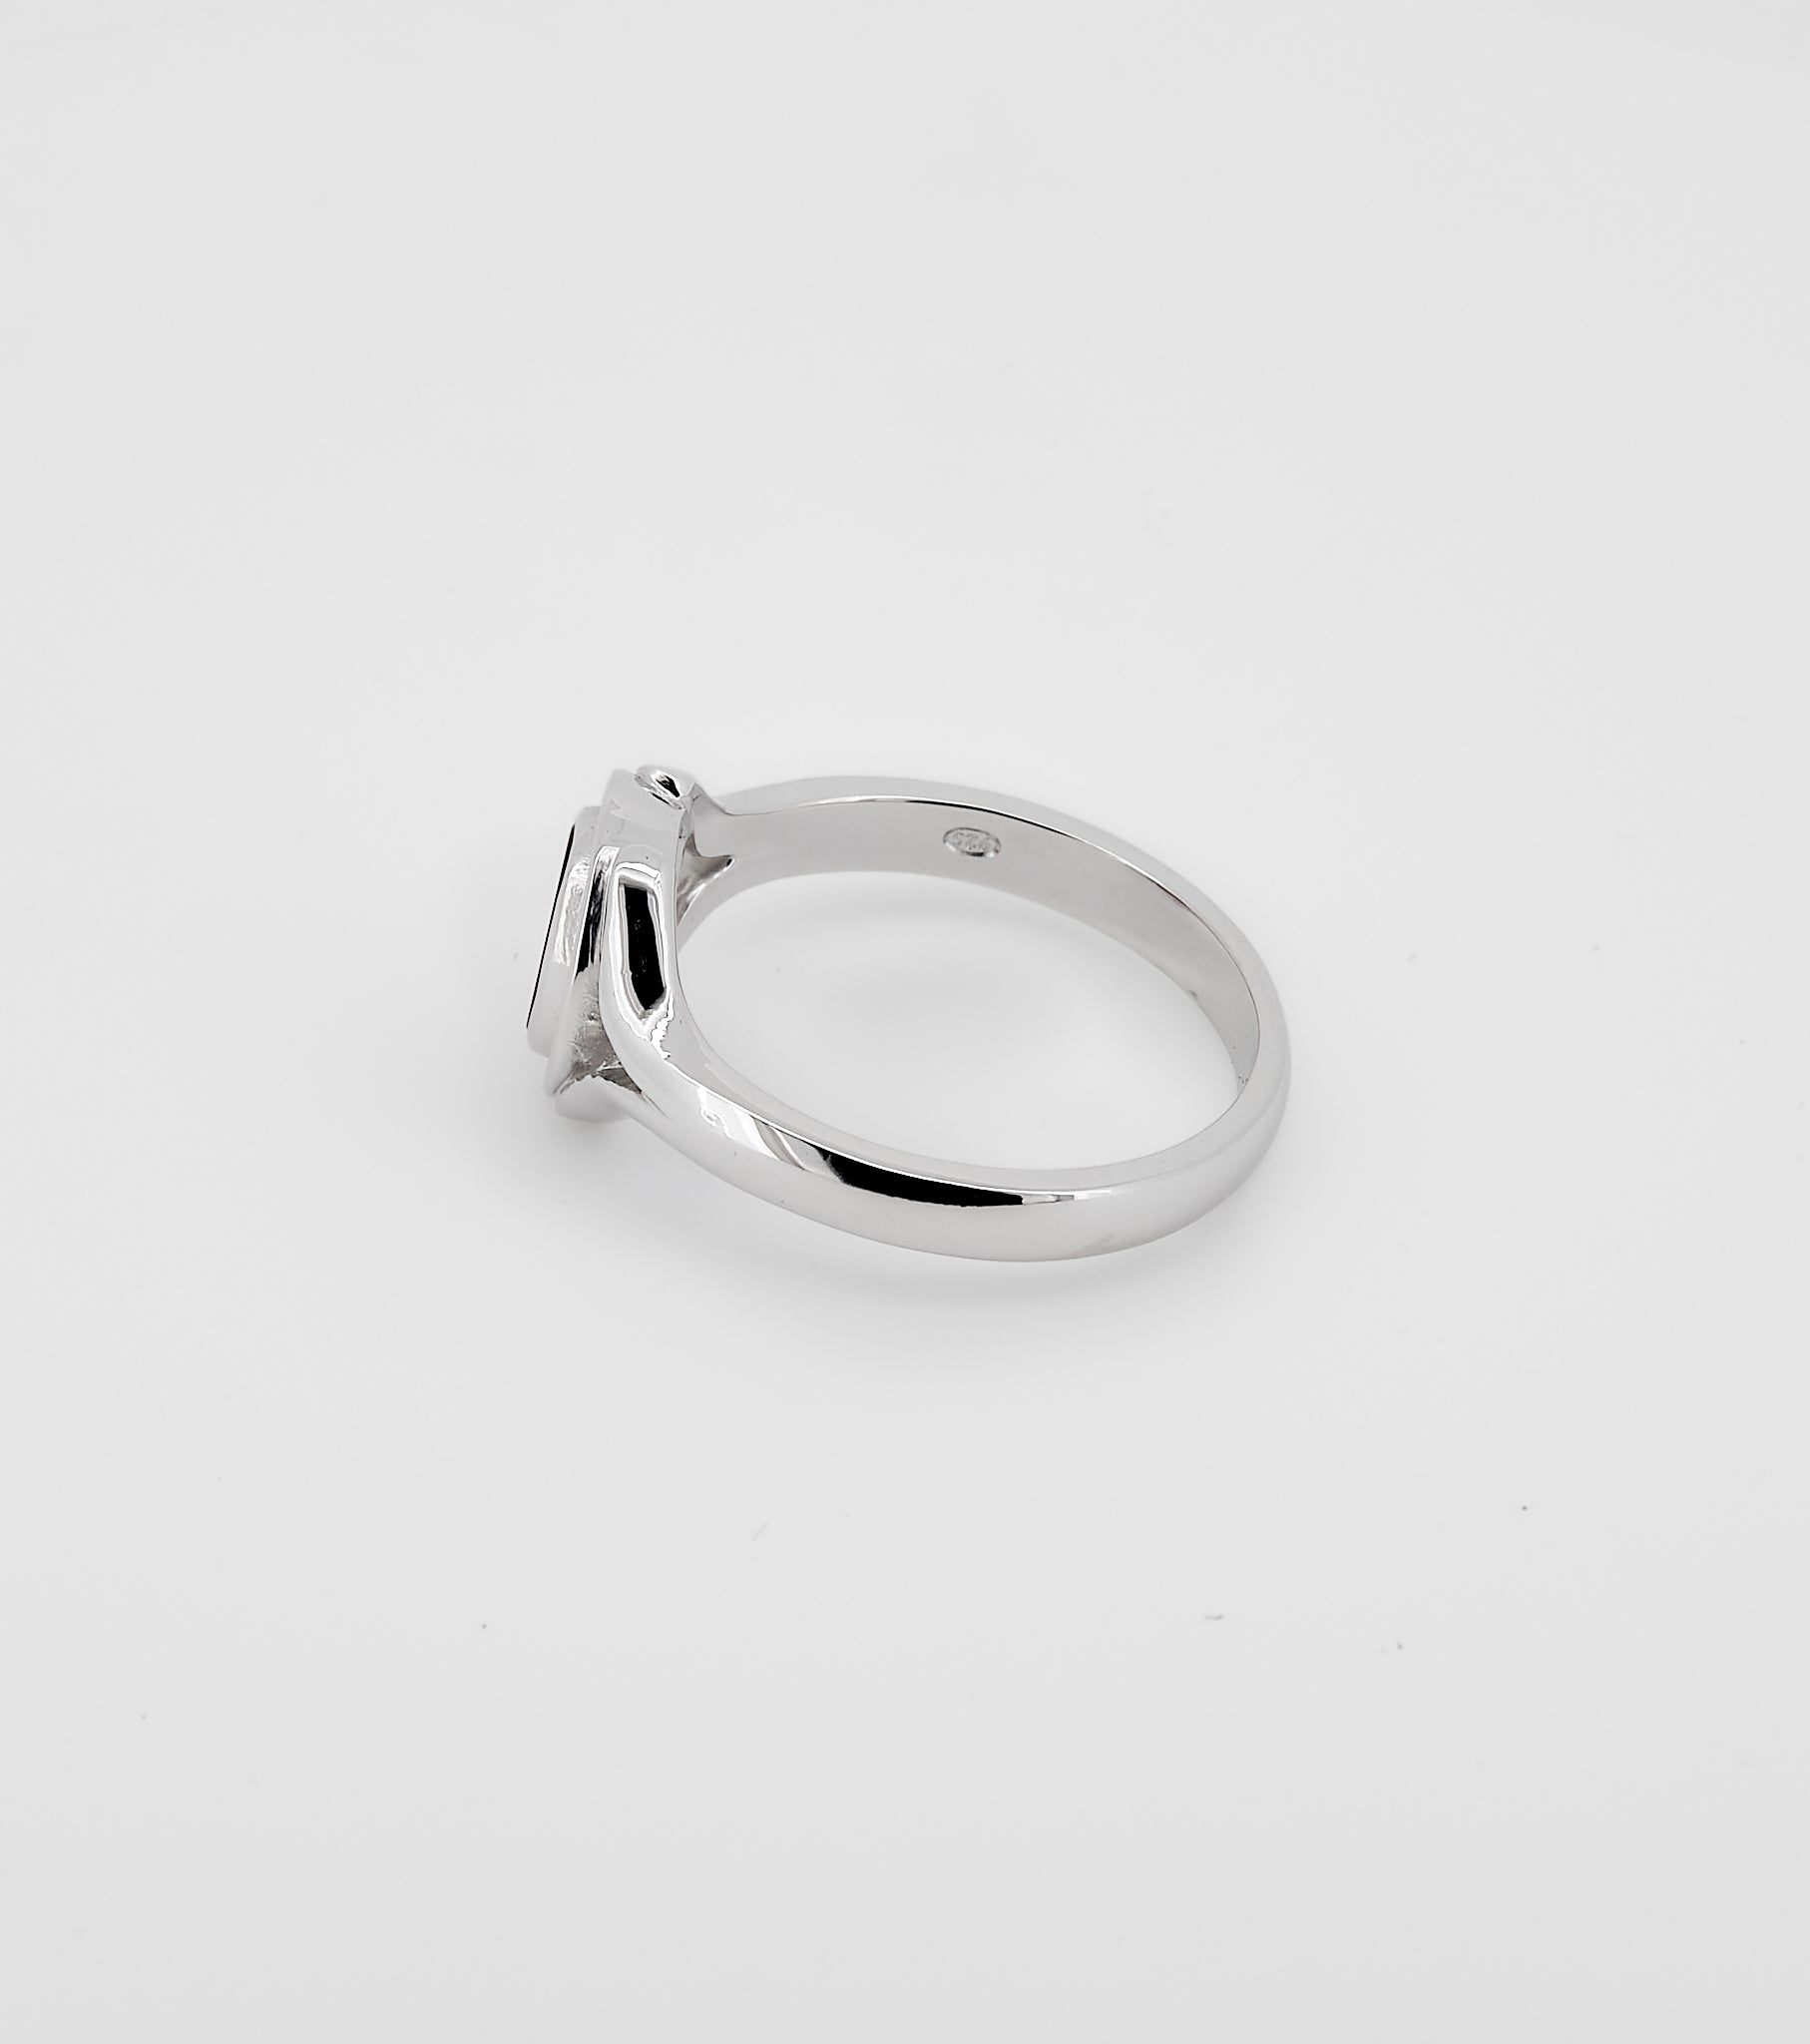 Surround oval Onyx Ring